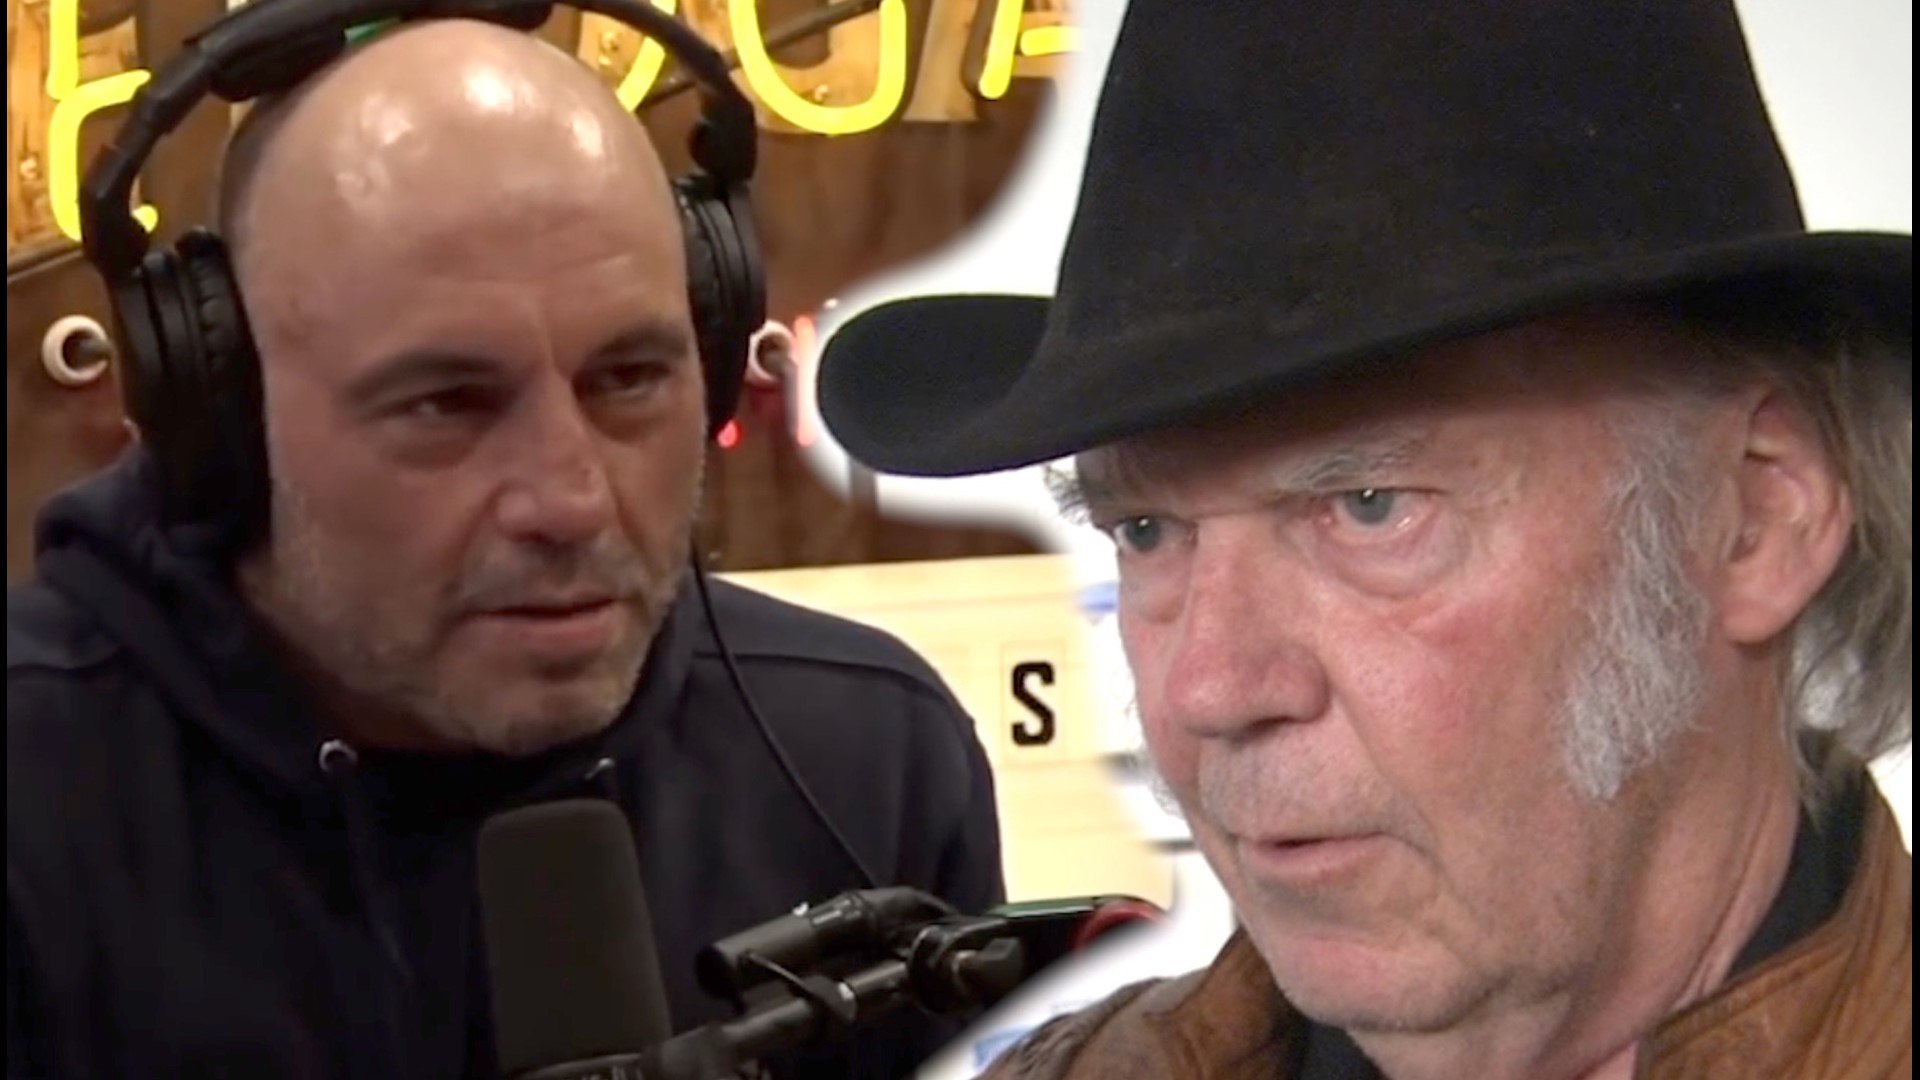 Rock legend Neil Young demanded his team to remove his music from Spotify in response to Joe Rogan's spread of COVD-19 vaccine misinformation. Veuer's Maria Mercedes Galuppo has the story.